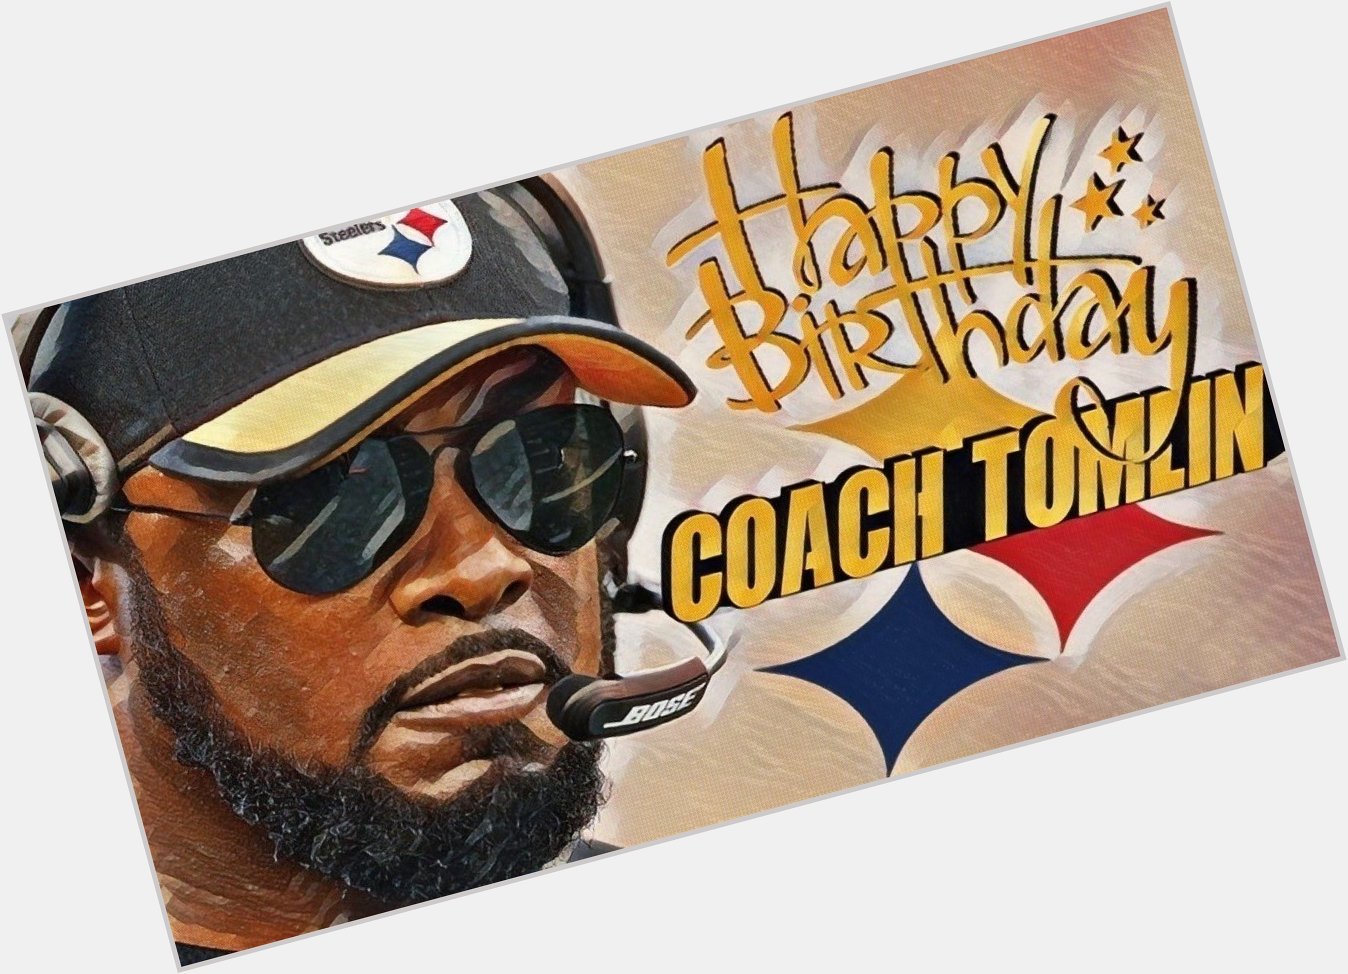 Wishing Pittsburgh Steelers Head Coach Mike Tomlin a very Happy BDay!
We Hope your day is Great! 